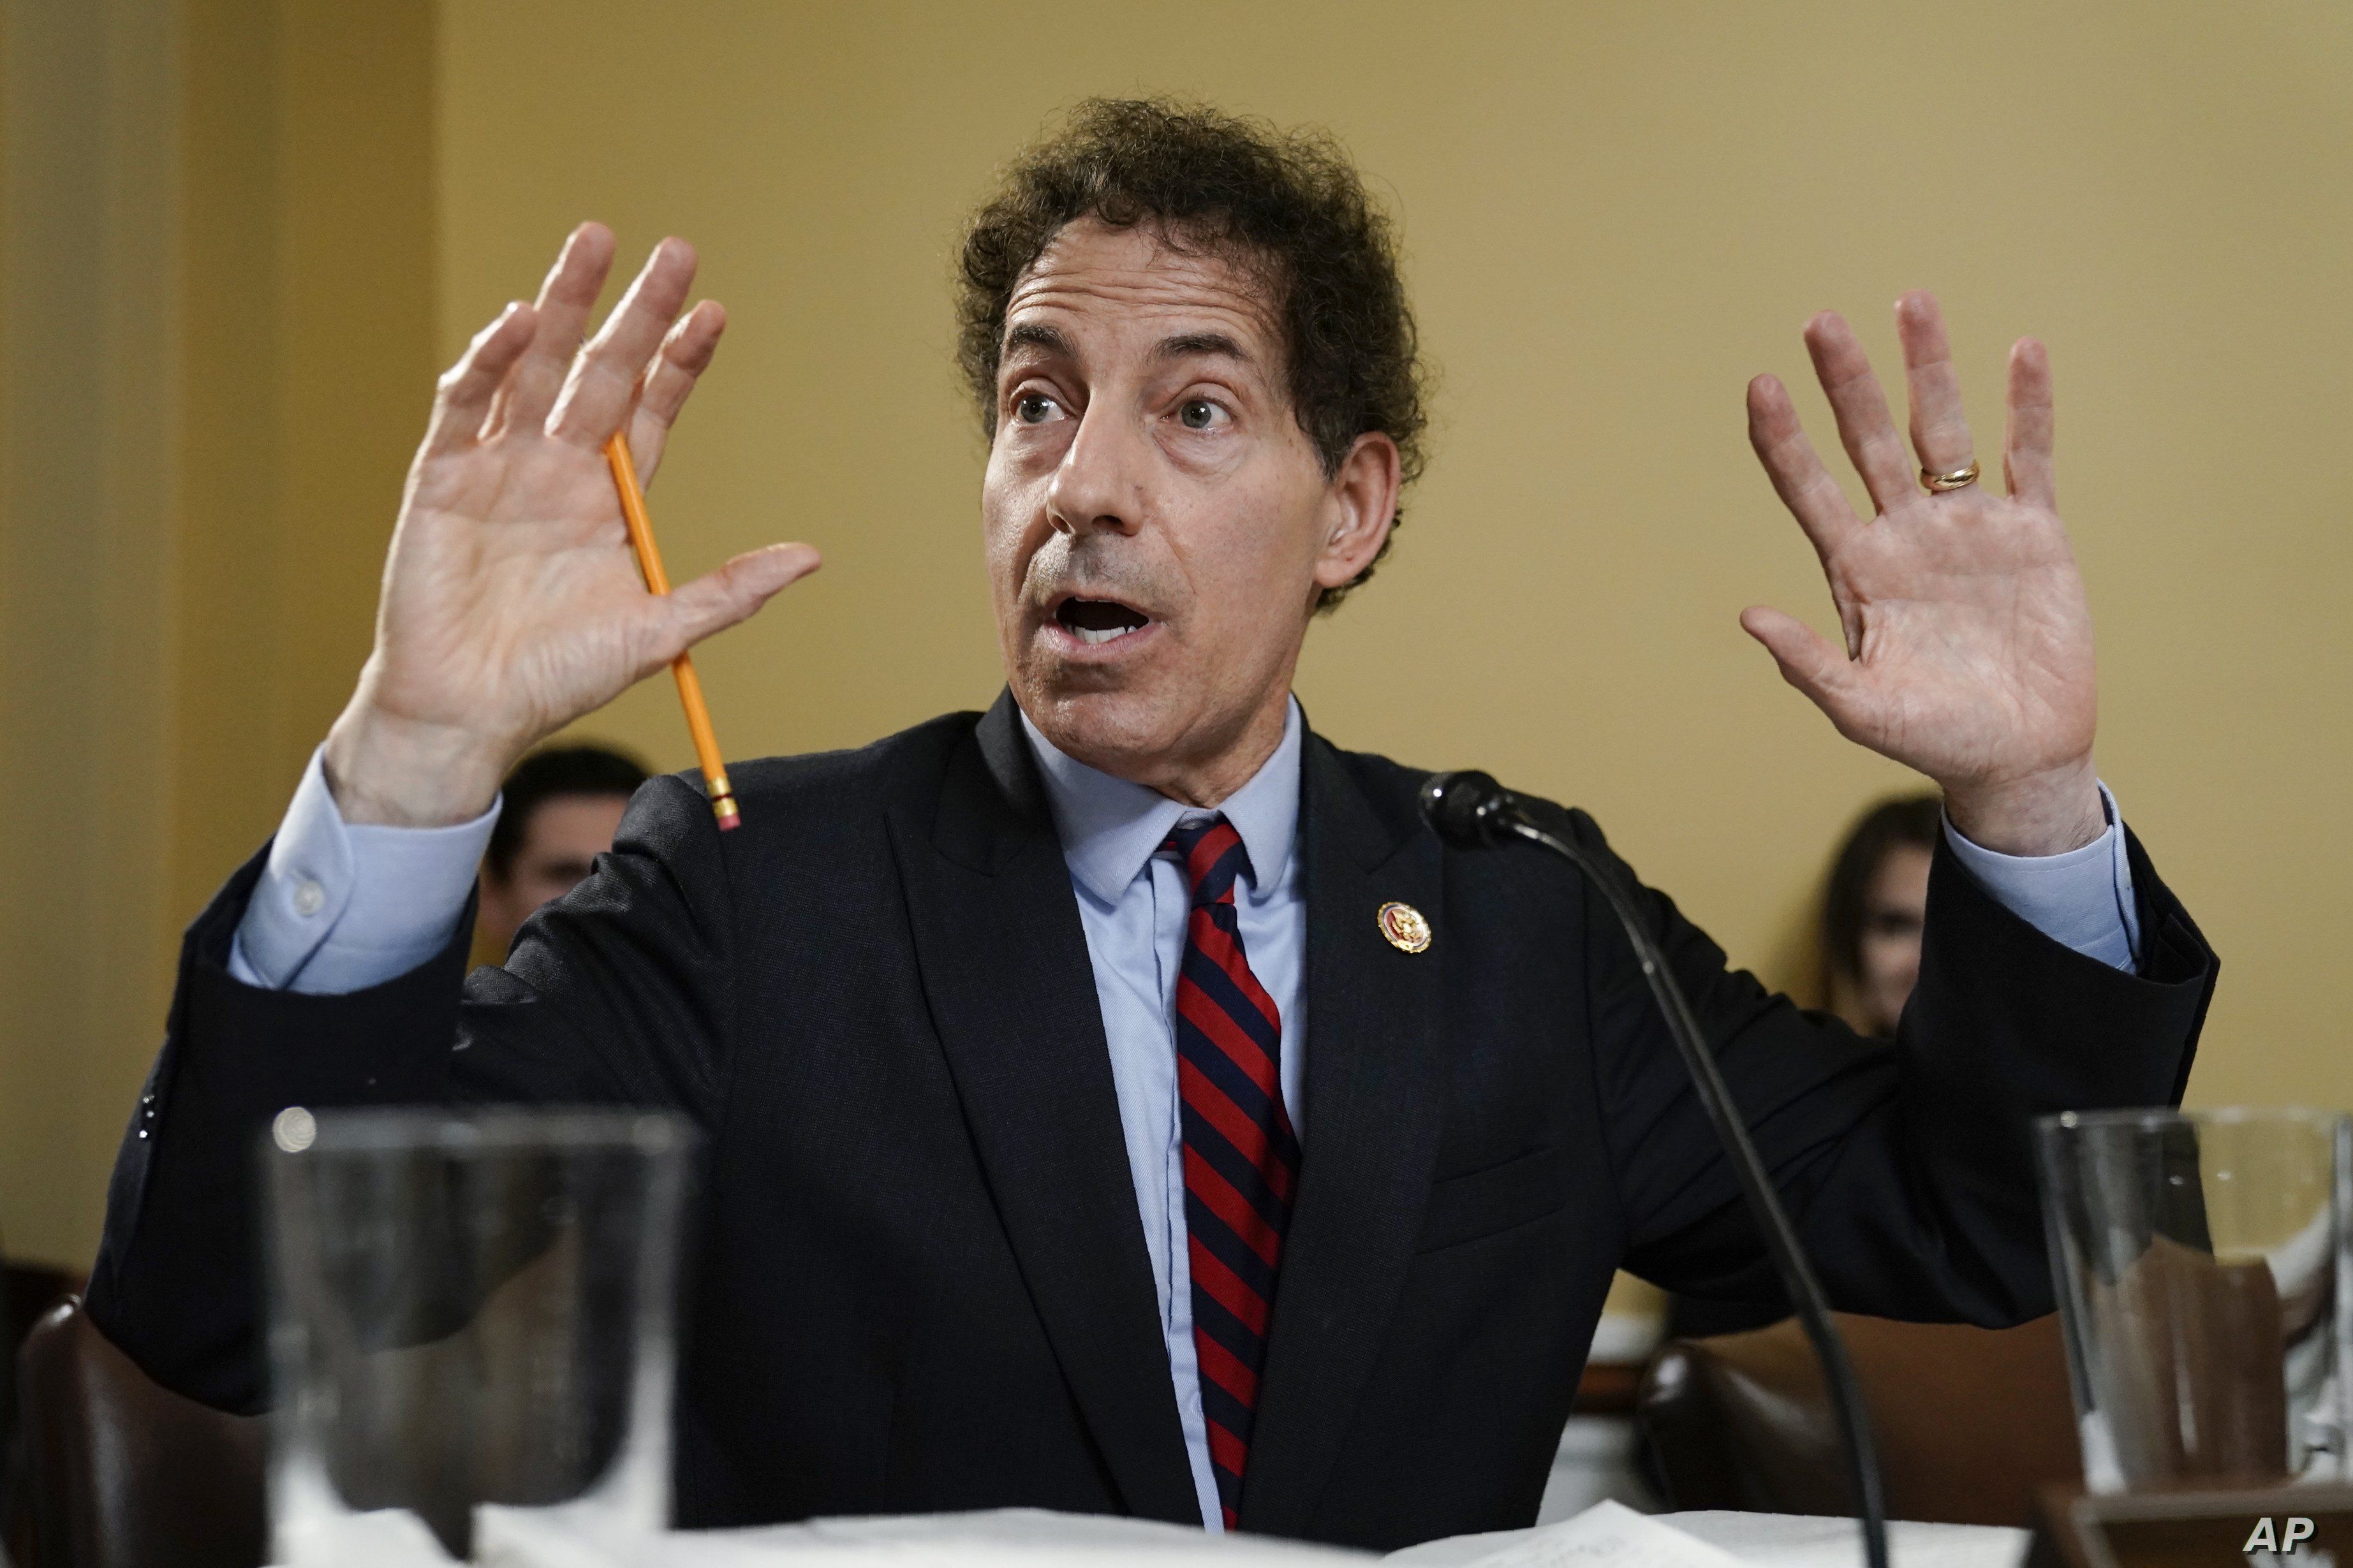 Rep. Jamie Raskin, D-Md., counters arguments by Republicans on the House Rules Committee as they vote to authorize contempt cases against Attorney General William Barr and former White House counsel Donald McGahn for failing to comply with subpoenas…